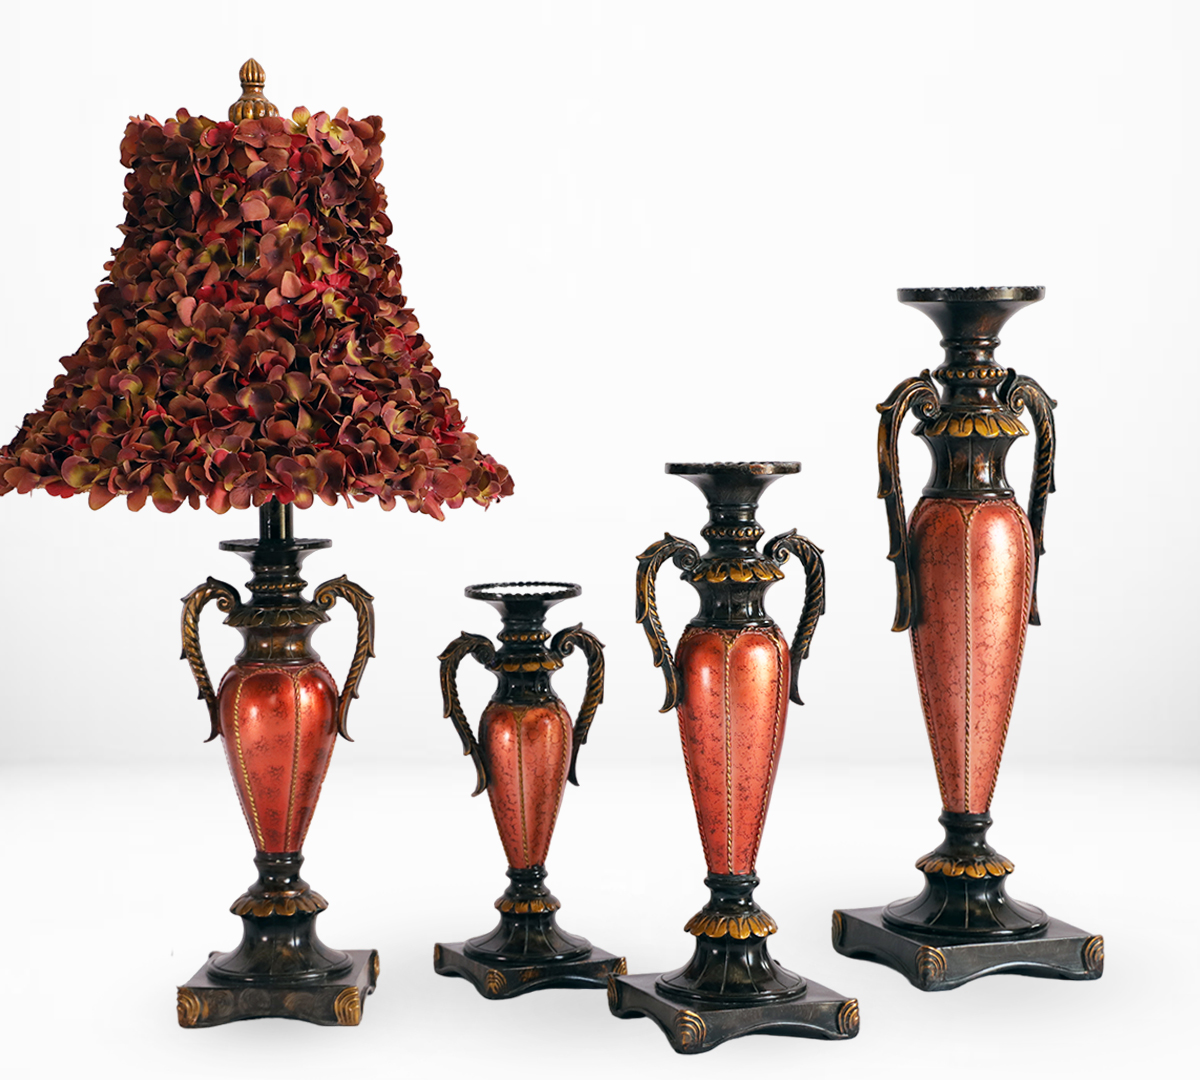 A Set Of Vases With Lampshades Covered With Artificial Rose Leaves - Hand Arranged